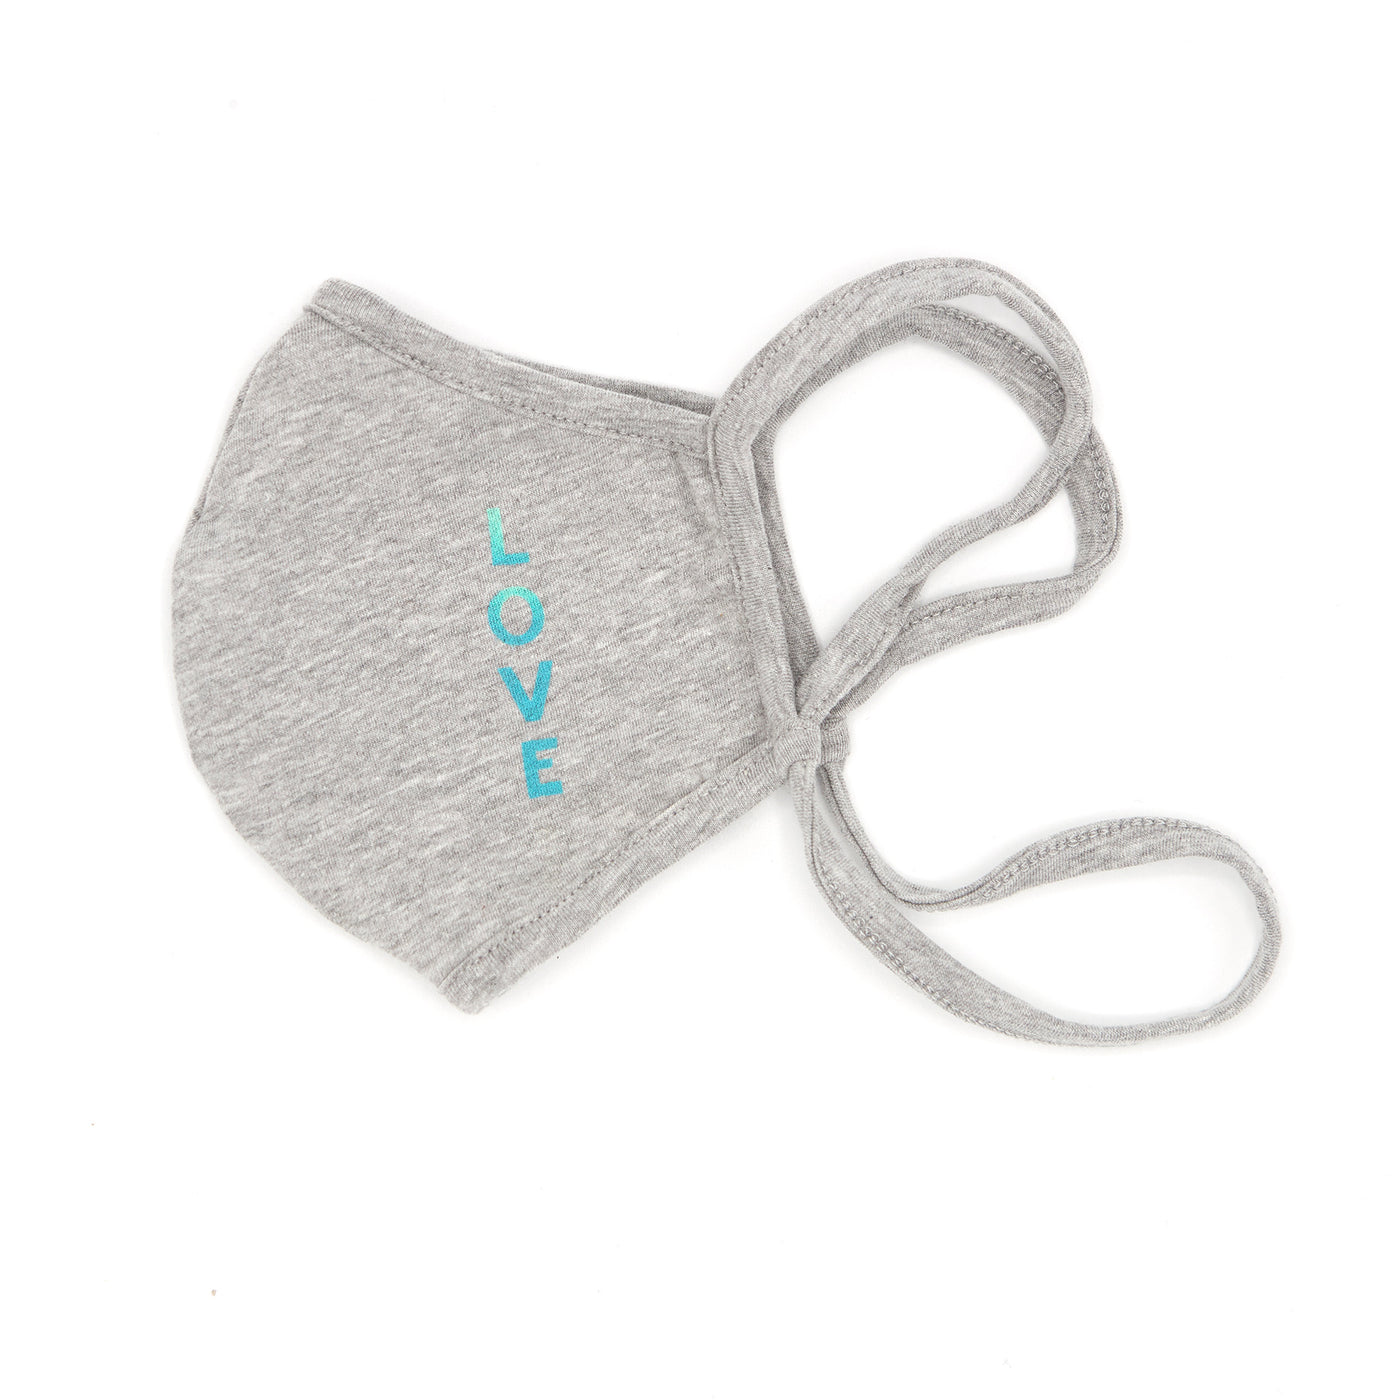 BAILEY BERRY LOVE Adult Face Mask with Adjustable Eternity Strap, Filter Pocket